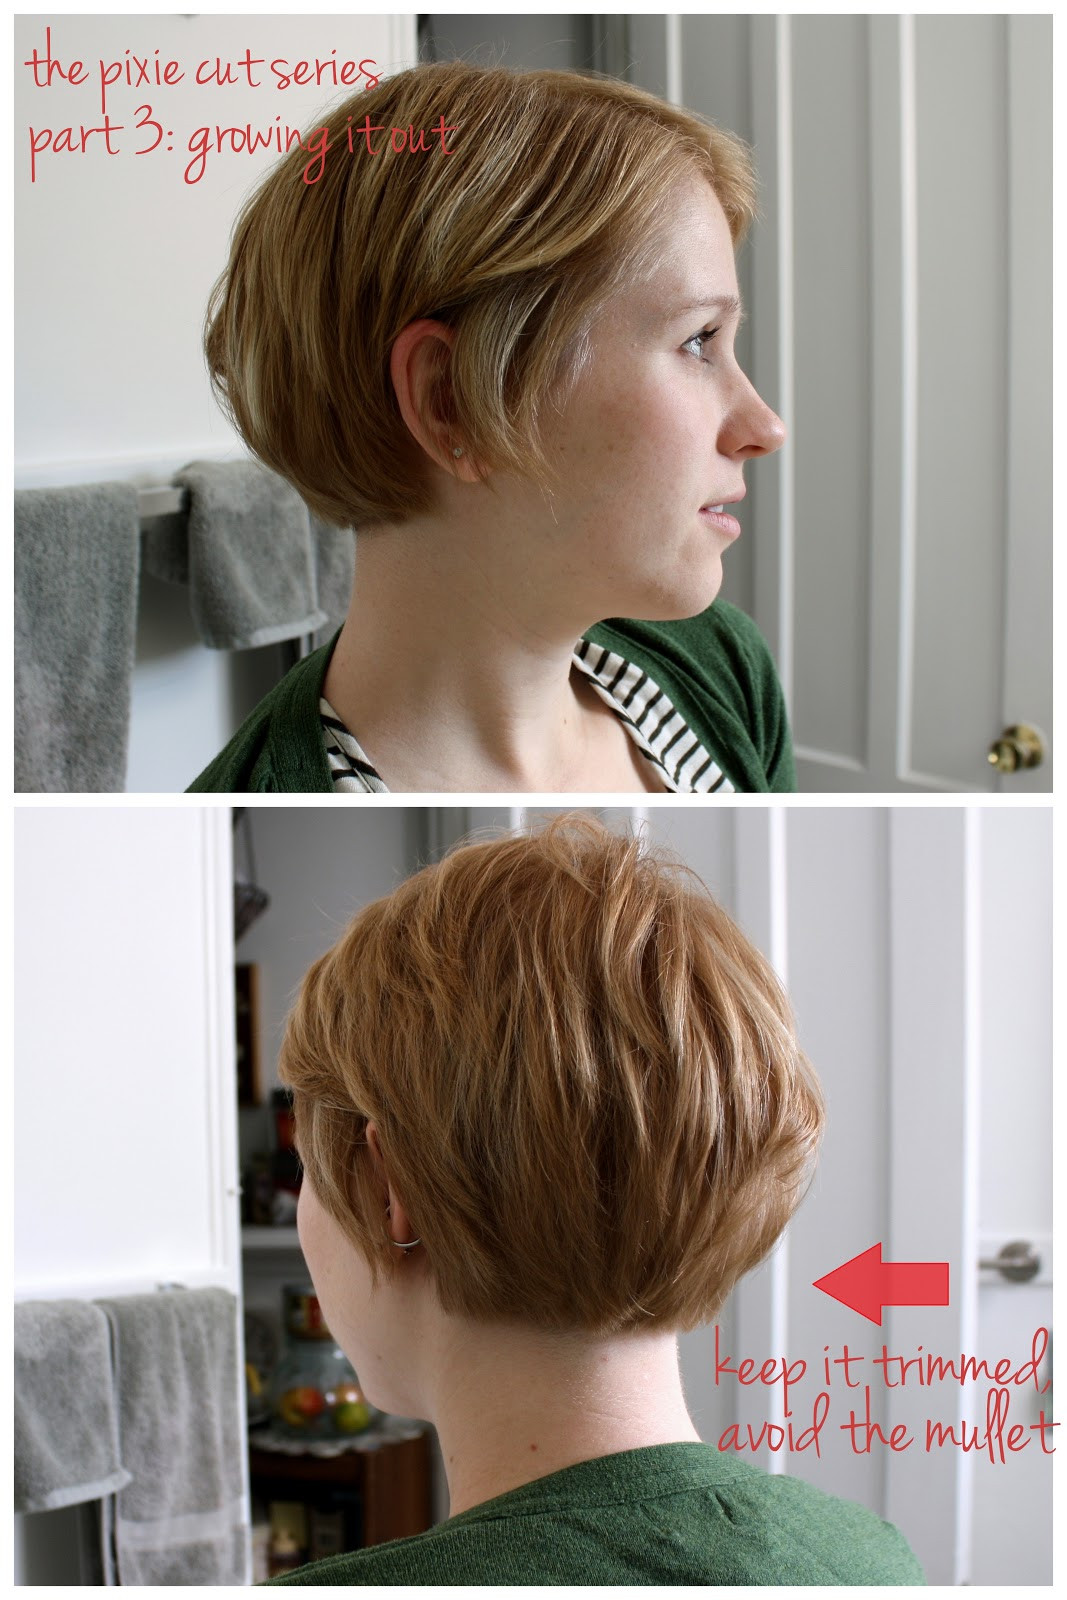 Growing Out Short Hairstyles
 unspeakable visions the pixie cut series part 3 growing